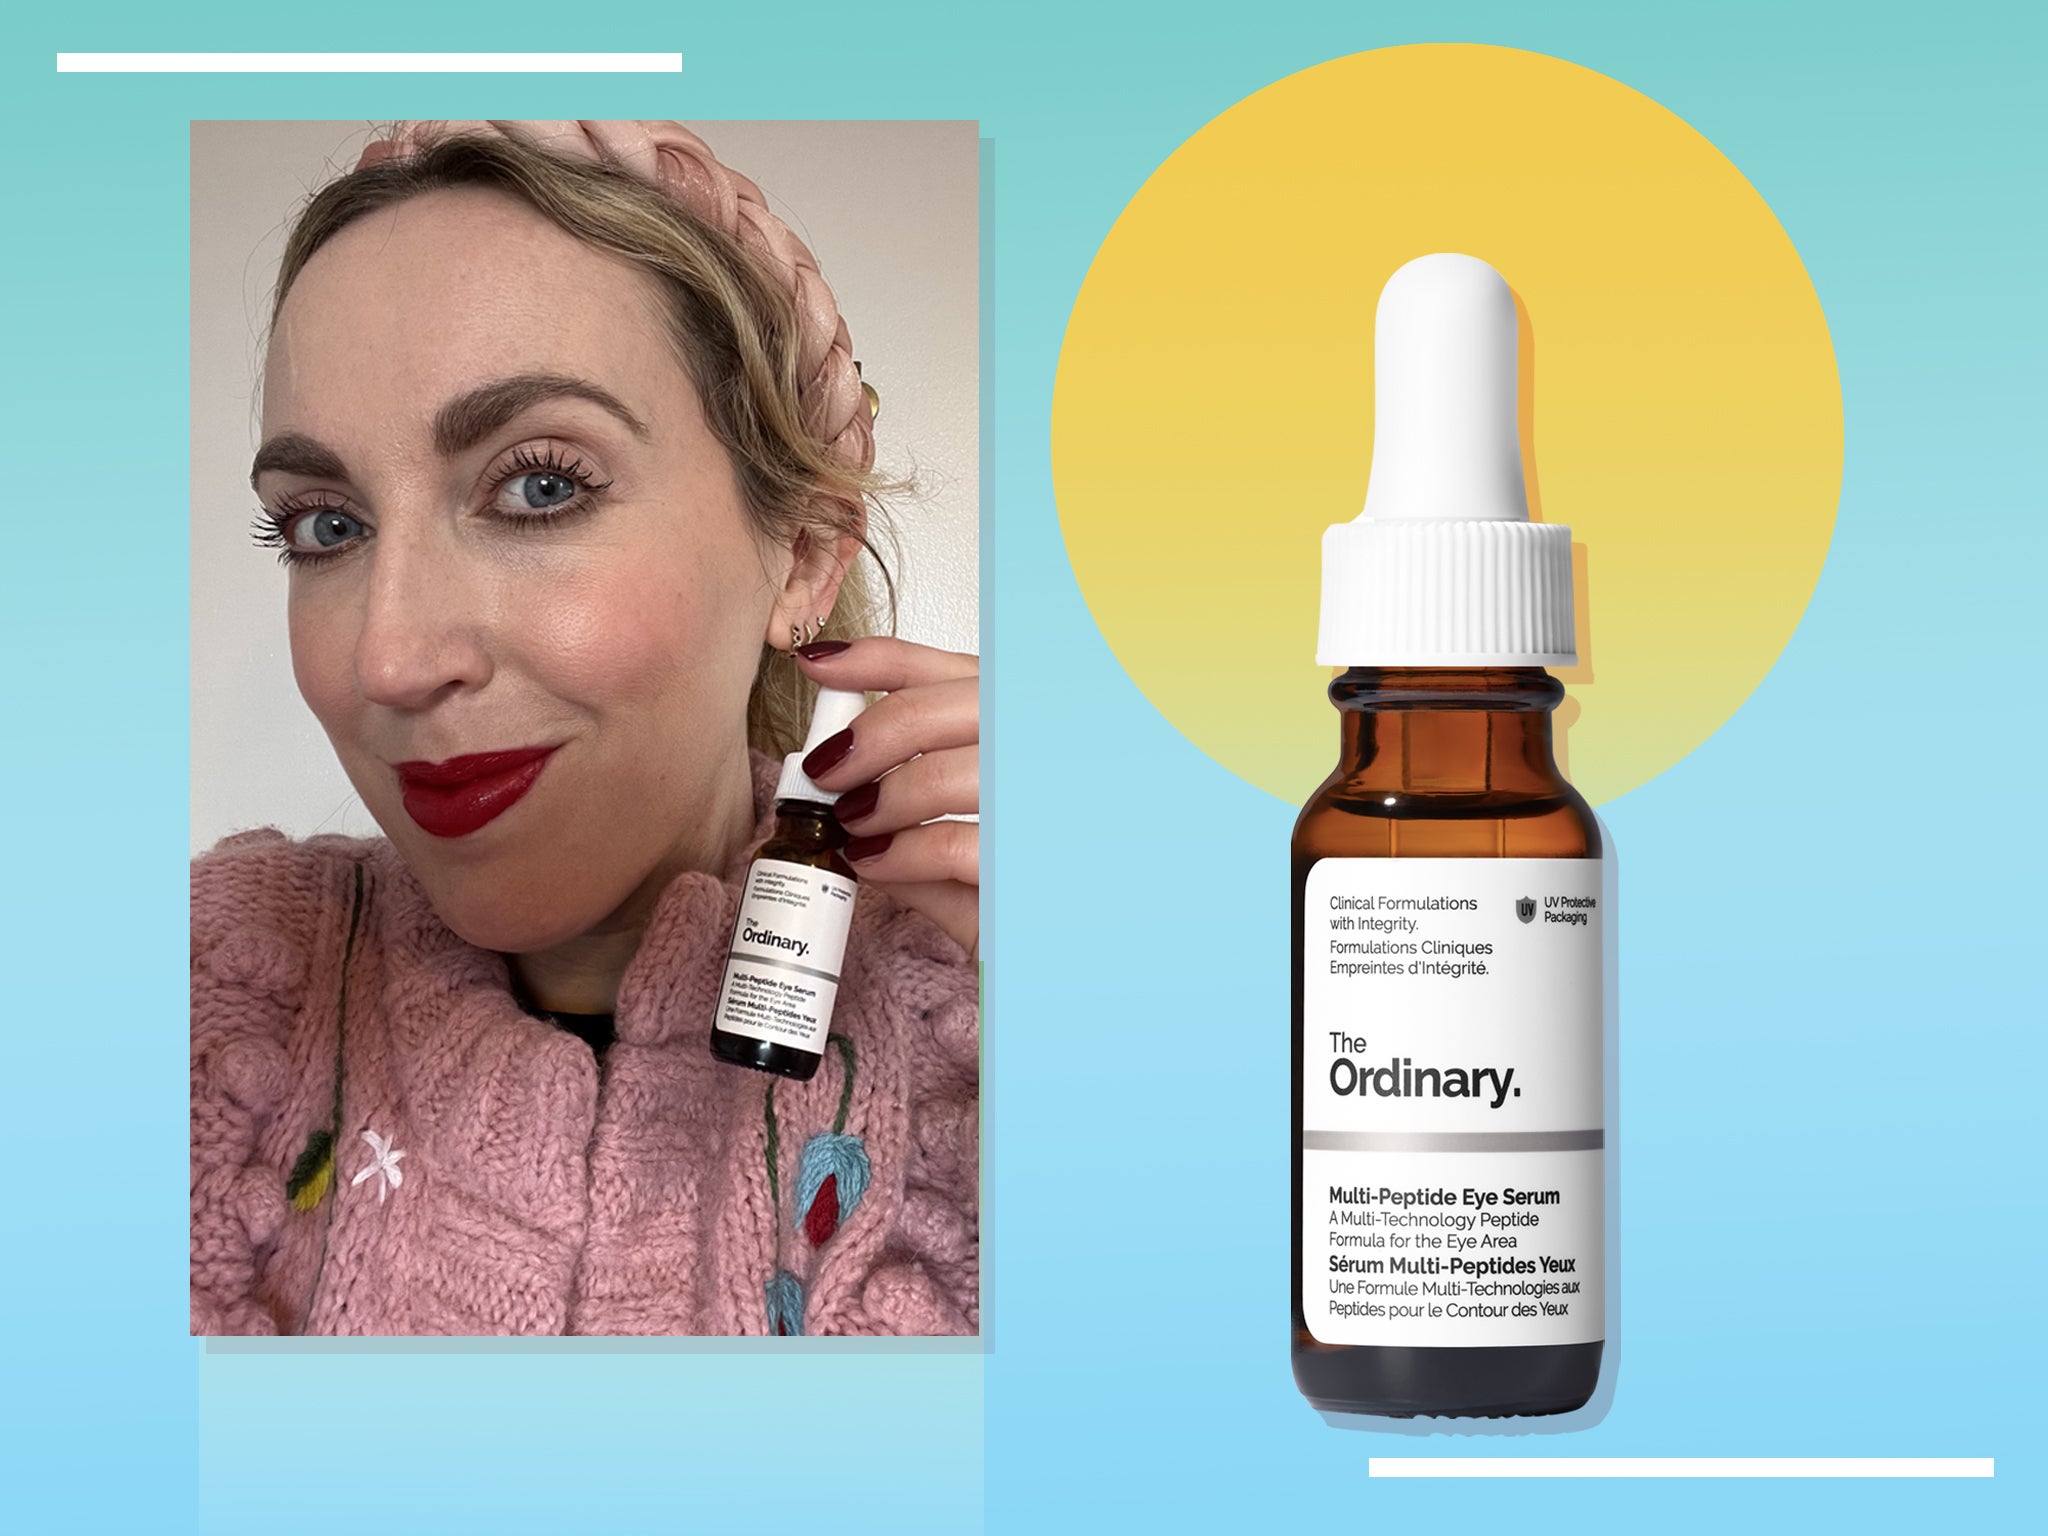 We tried The Ordinary’s new multi-peptide eye serum ahead of launch and we love it